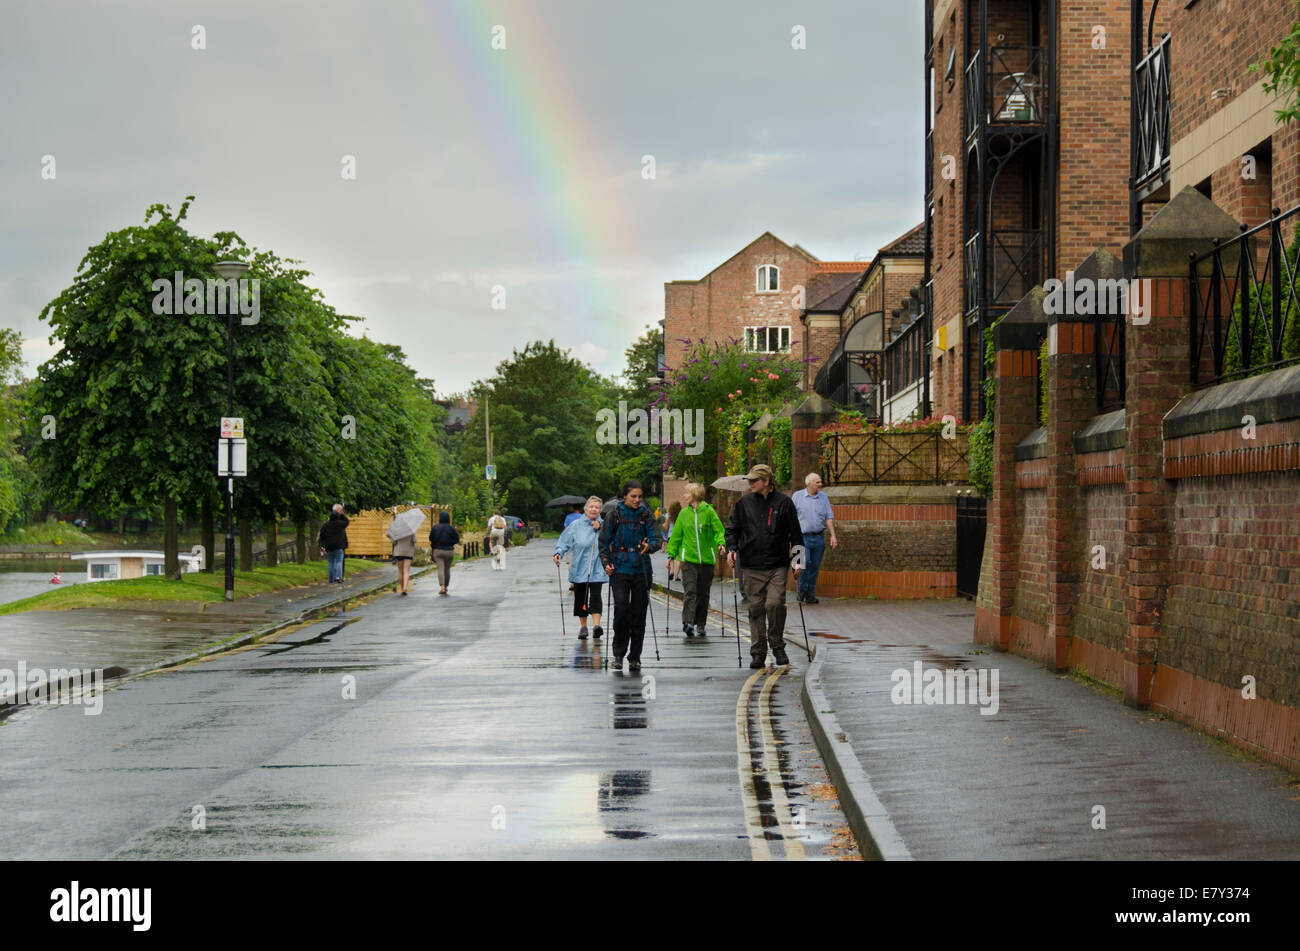 Rainbow high in grey cloudy sky after sudden downpour of rain soaked & wet people walking on riverside road - York, North Yorkshire, England, UK, Stock Photo